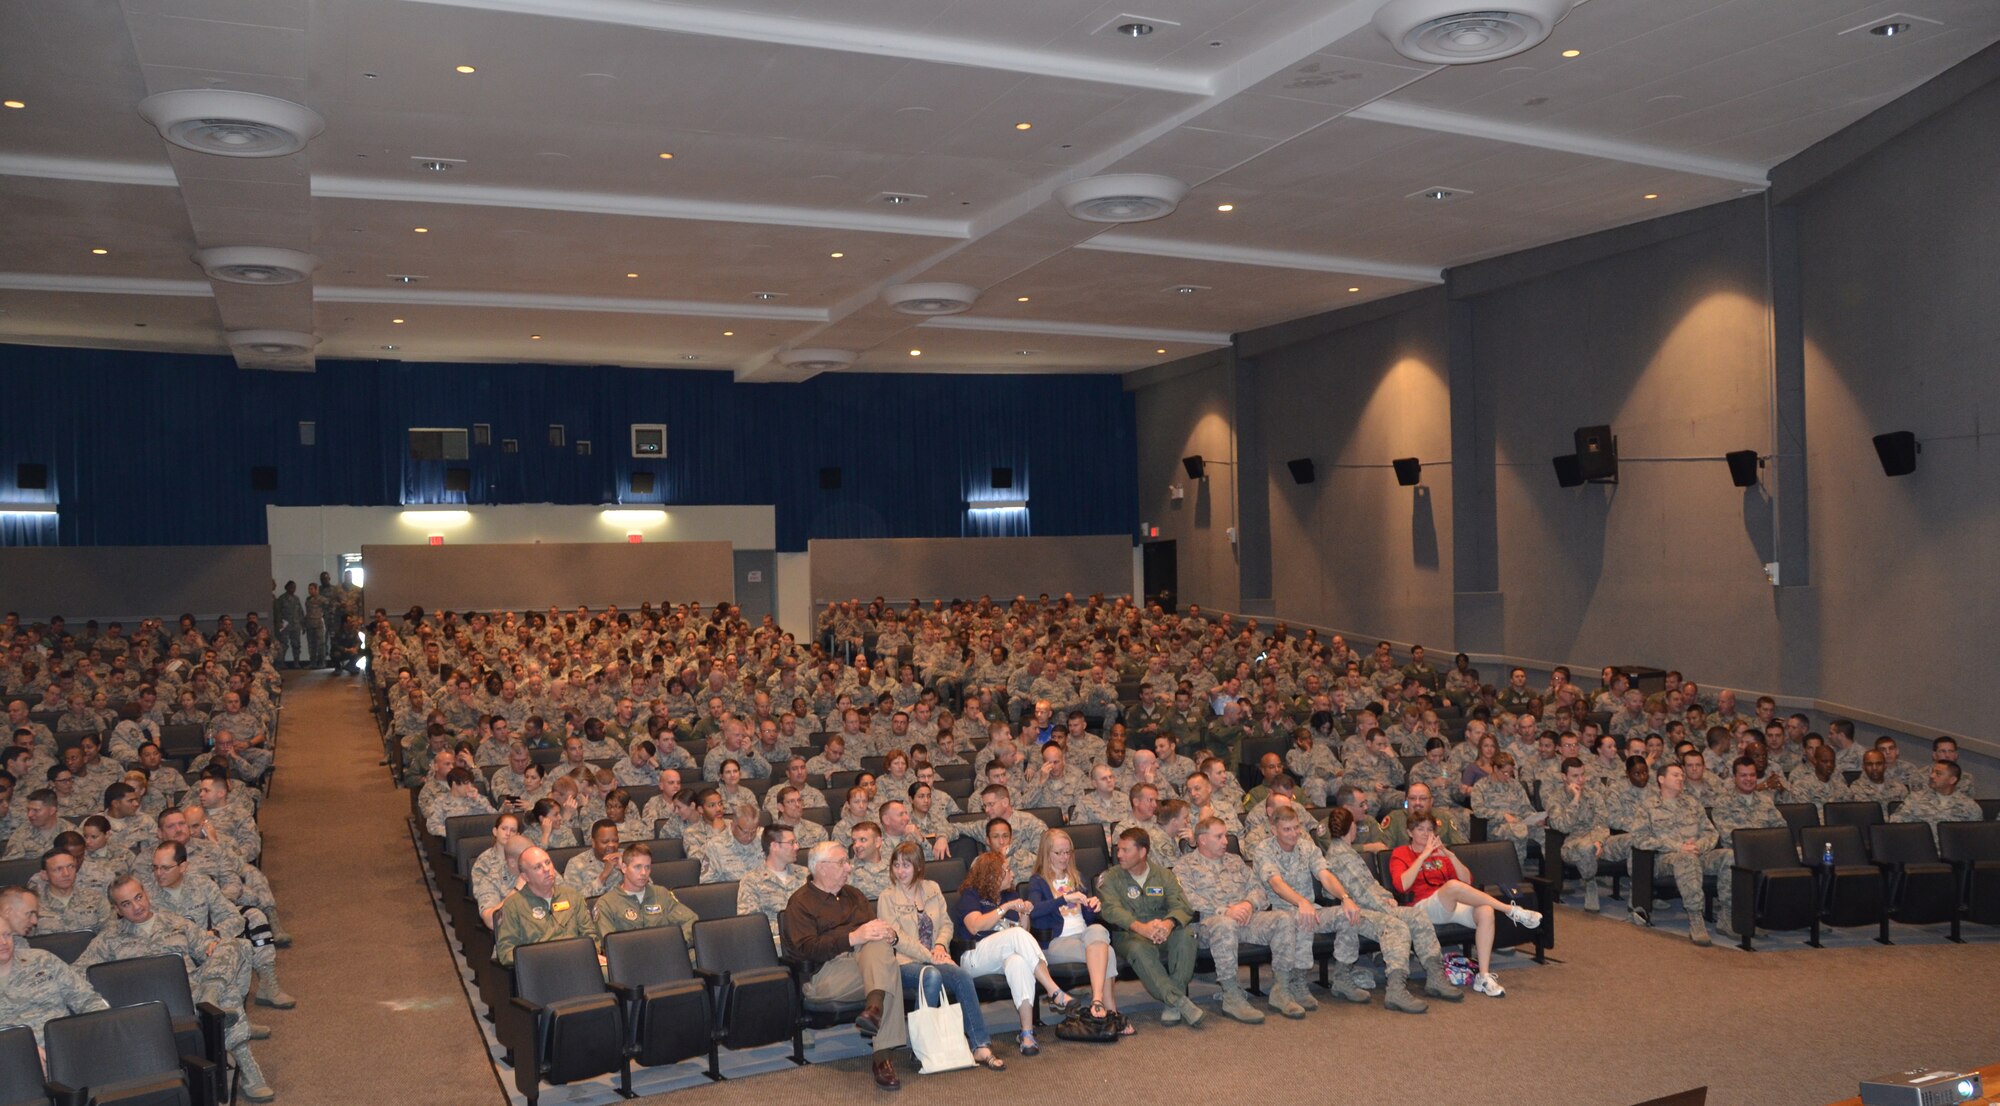 PATRICK AIR FORCE BASE, Fla.- The base theater here was packed full of Rescue Reservists and their family members to hear the wing commander, Col. Jeffrey Macrander, speak at the Commander's Call Dec. 3. Colonel Jeffrey Macrander gave words of encouragement and updated wing members, and a few family members, who joined in, on matters of concern and wing events and activities during the event. (U.S. Air Force photo/Capt. Ryan Liss)